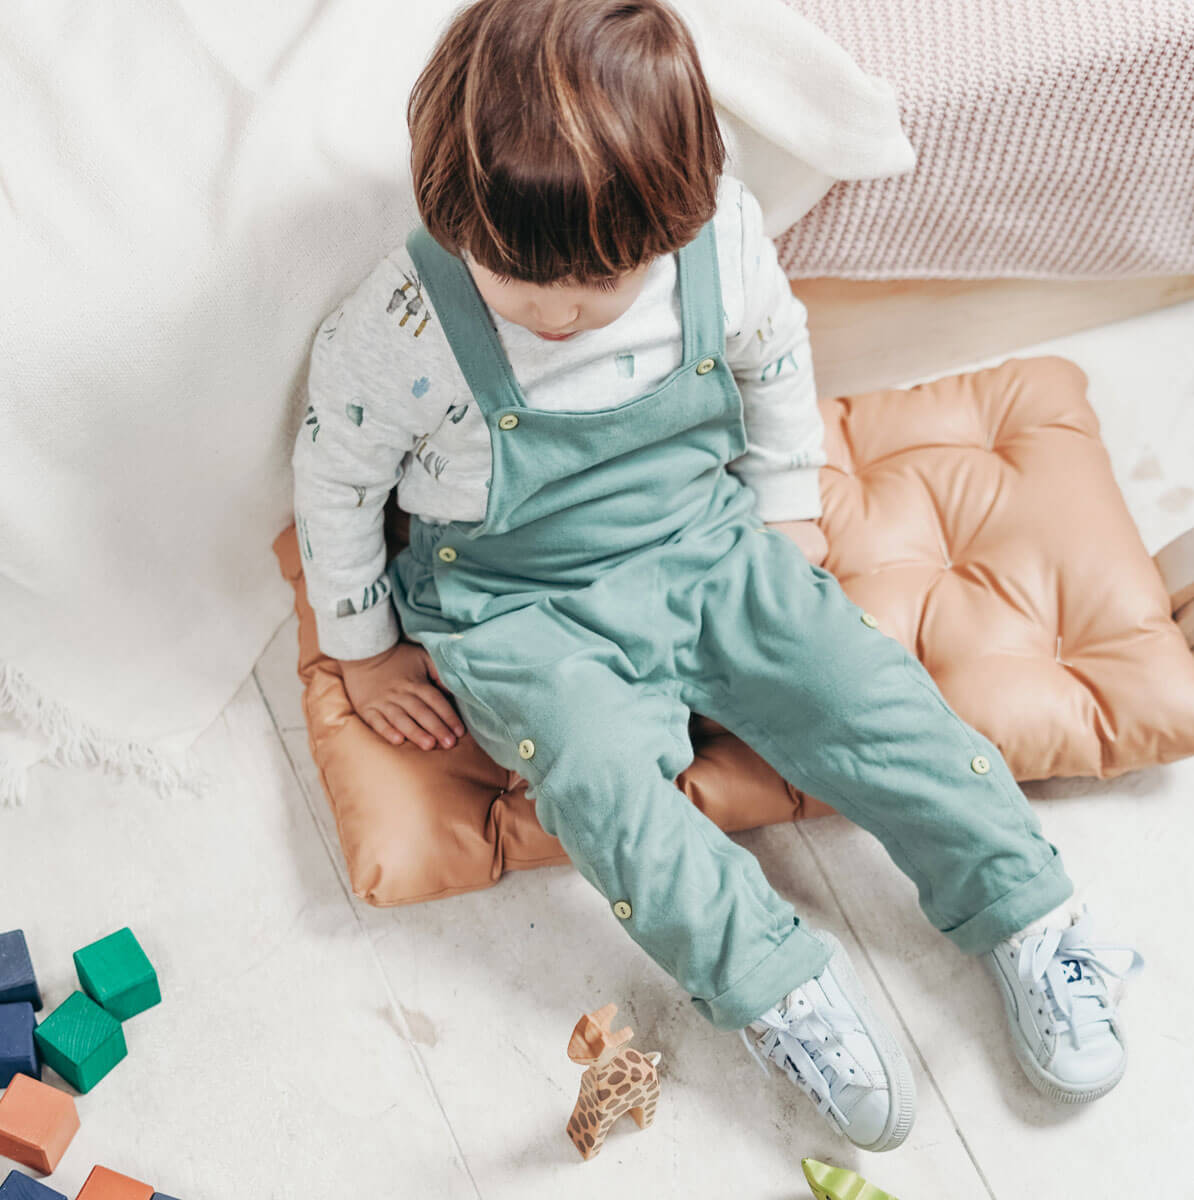 Little boy sitting on a pillow playing with toys